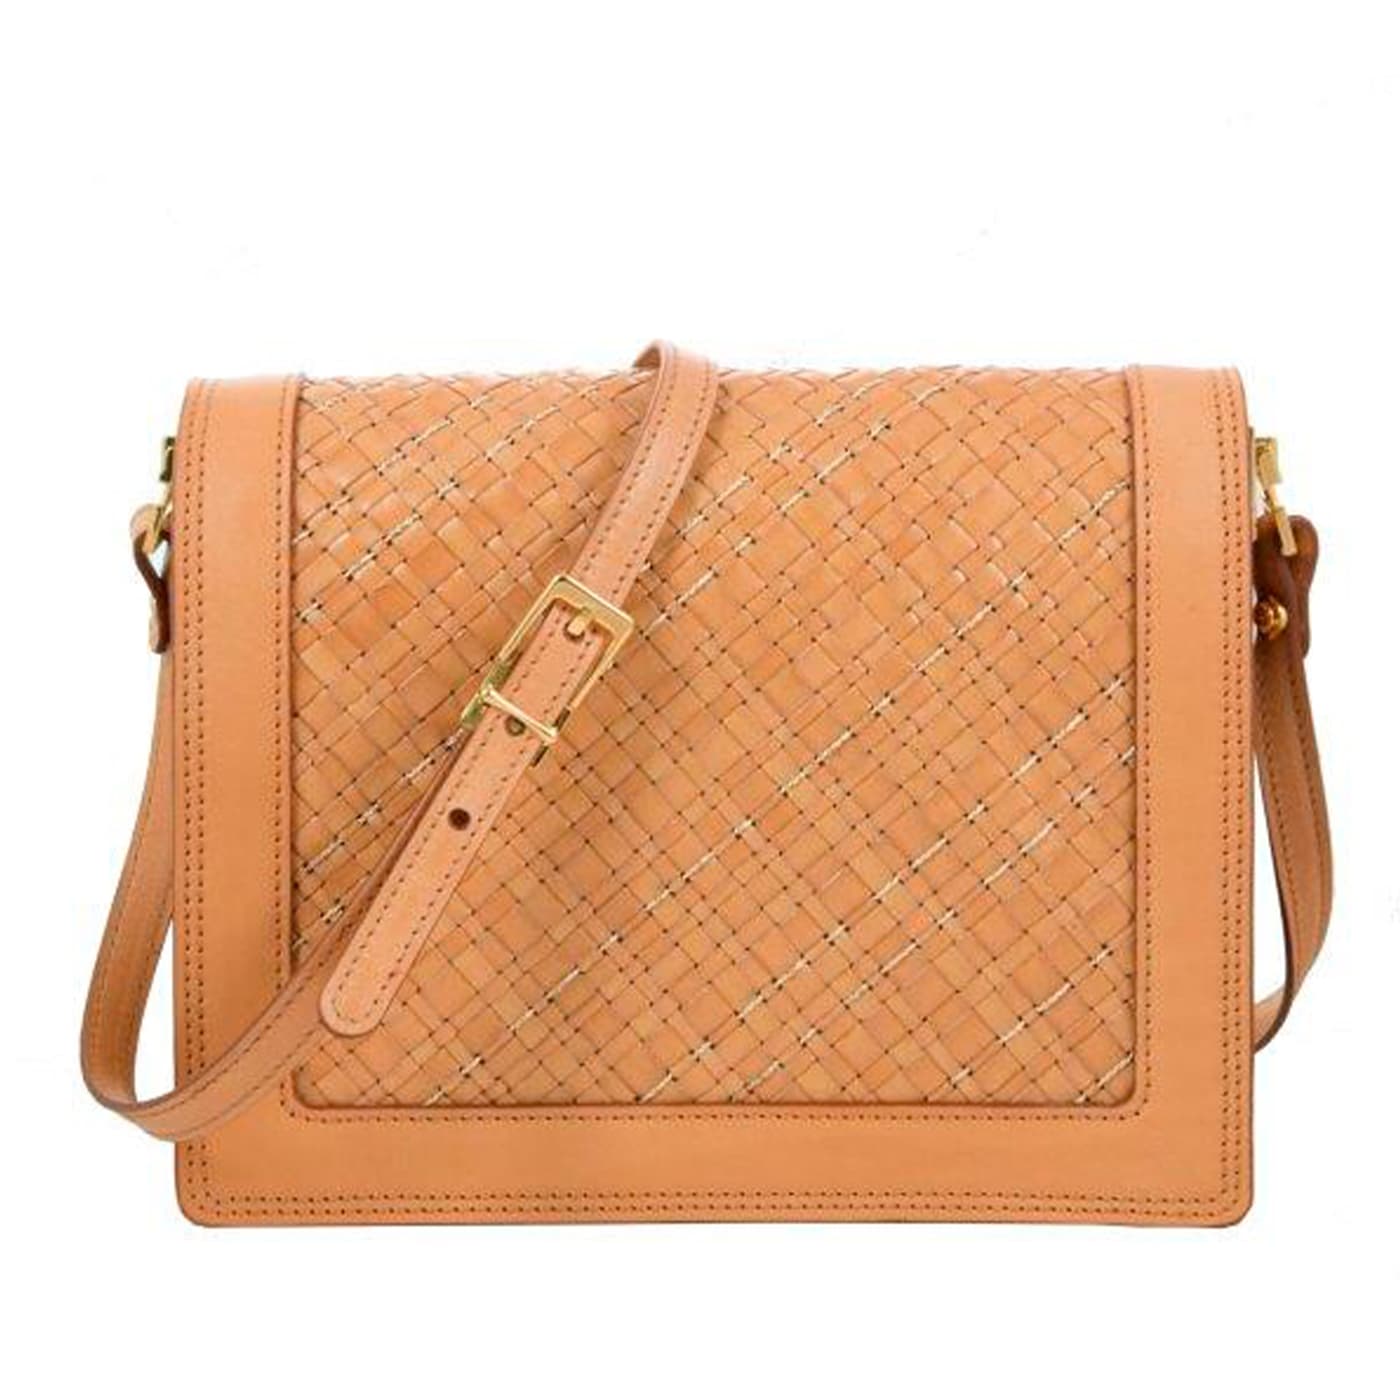 Quadro Braided Leather and Copper Beige Crossbody Bag - Athison